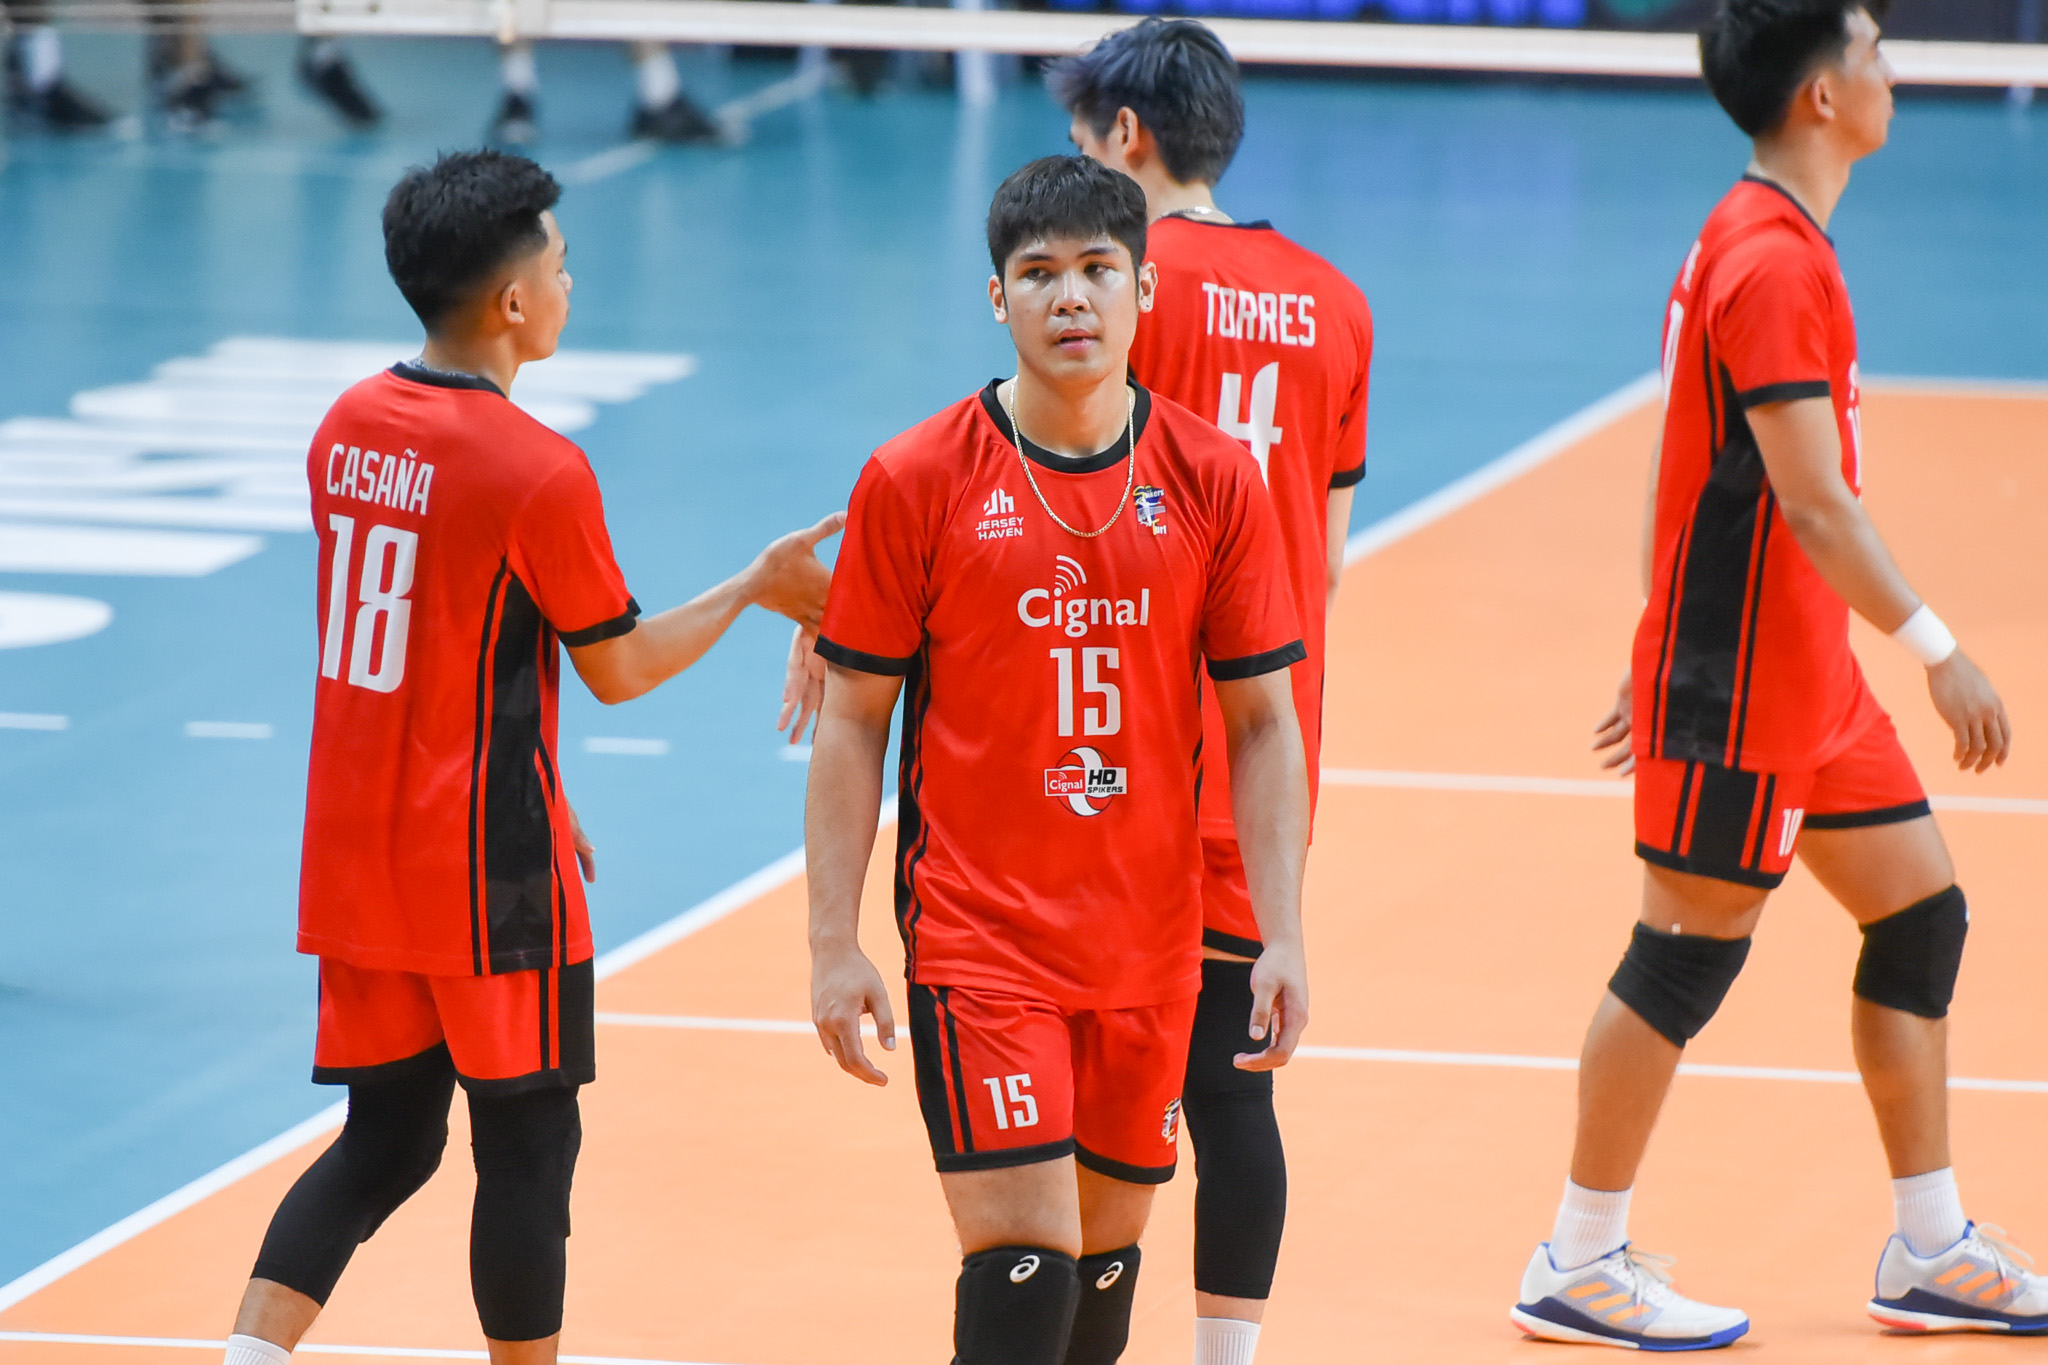 Cignal Nears Spikers Turf Finals Umandal Gives Cotabato First Semis Win Inquirer Sports